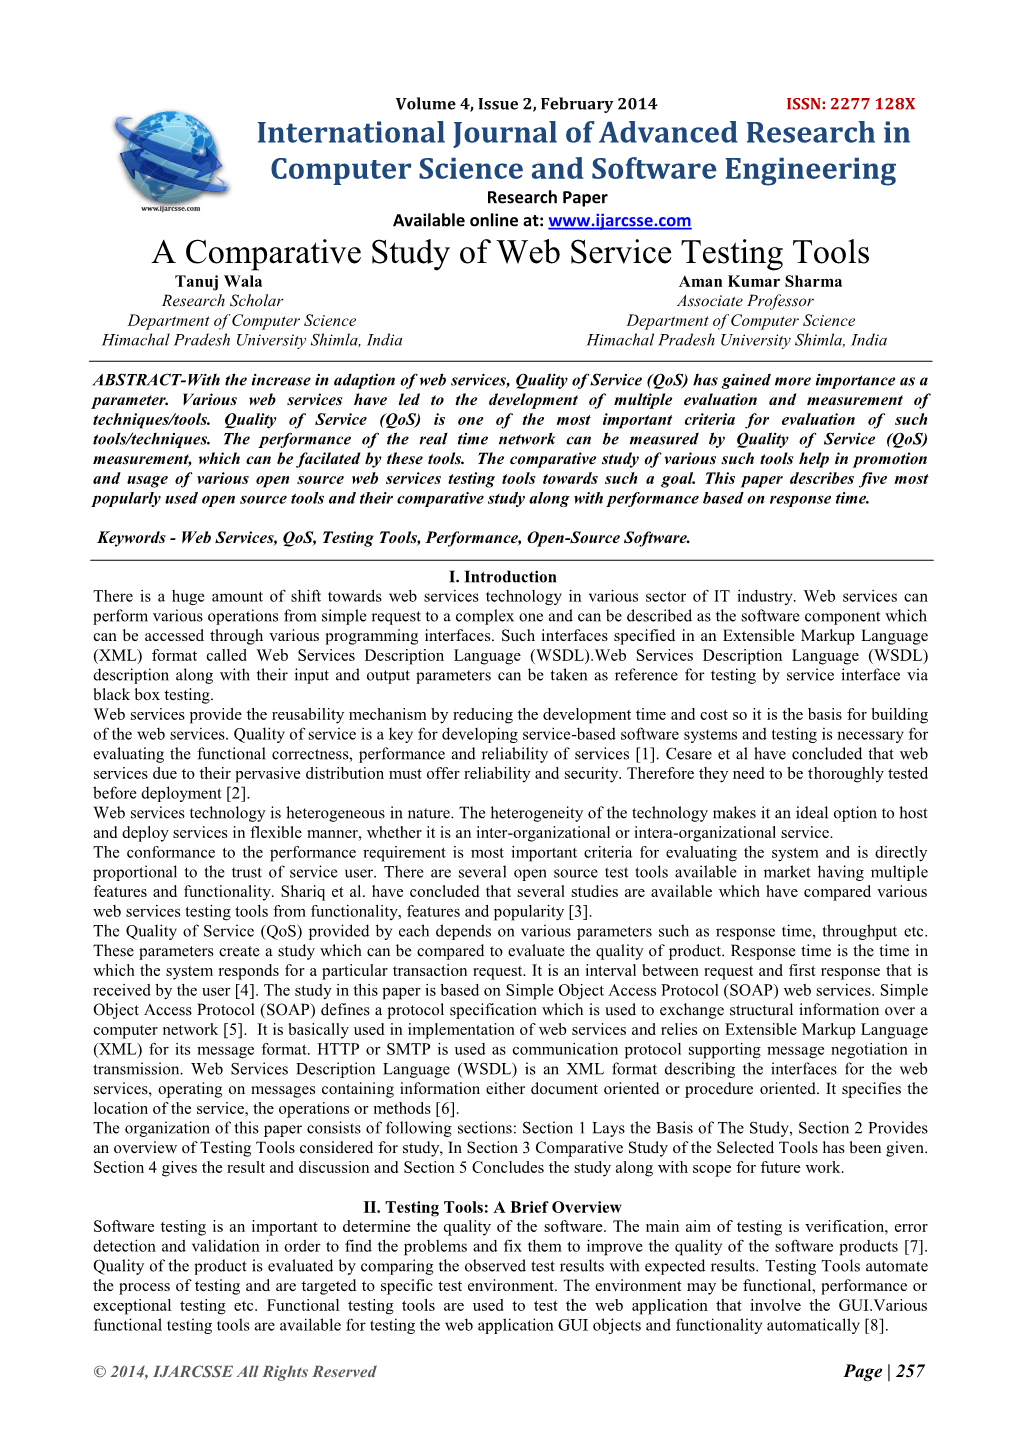 A Comparative Study of Web Service Testing Tools